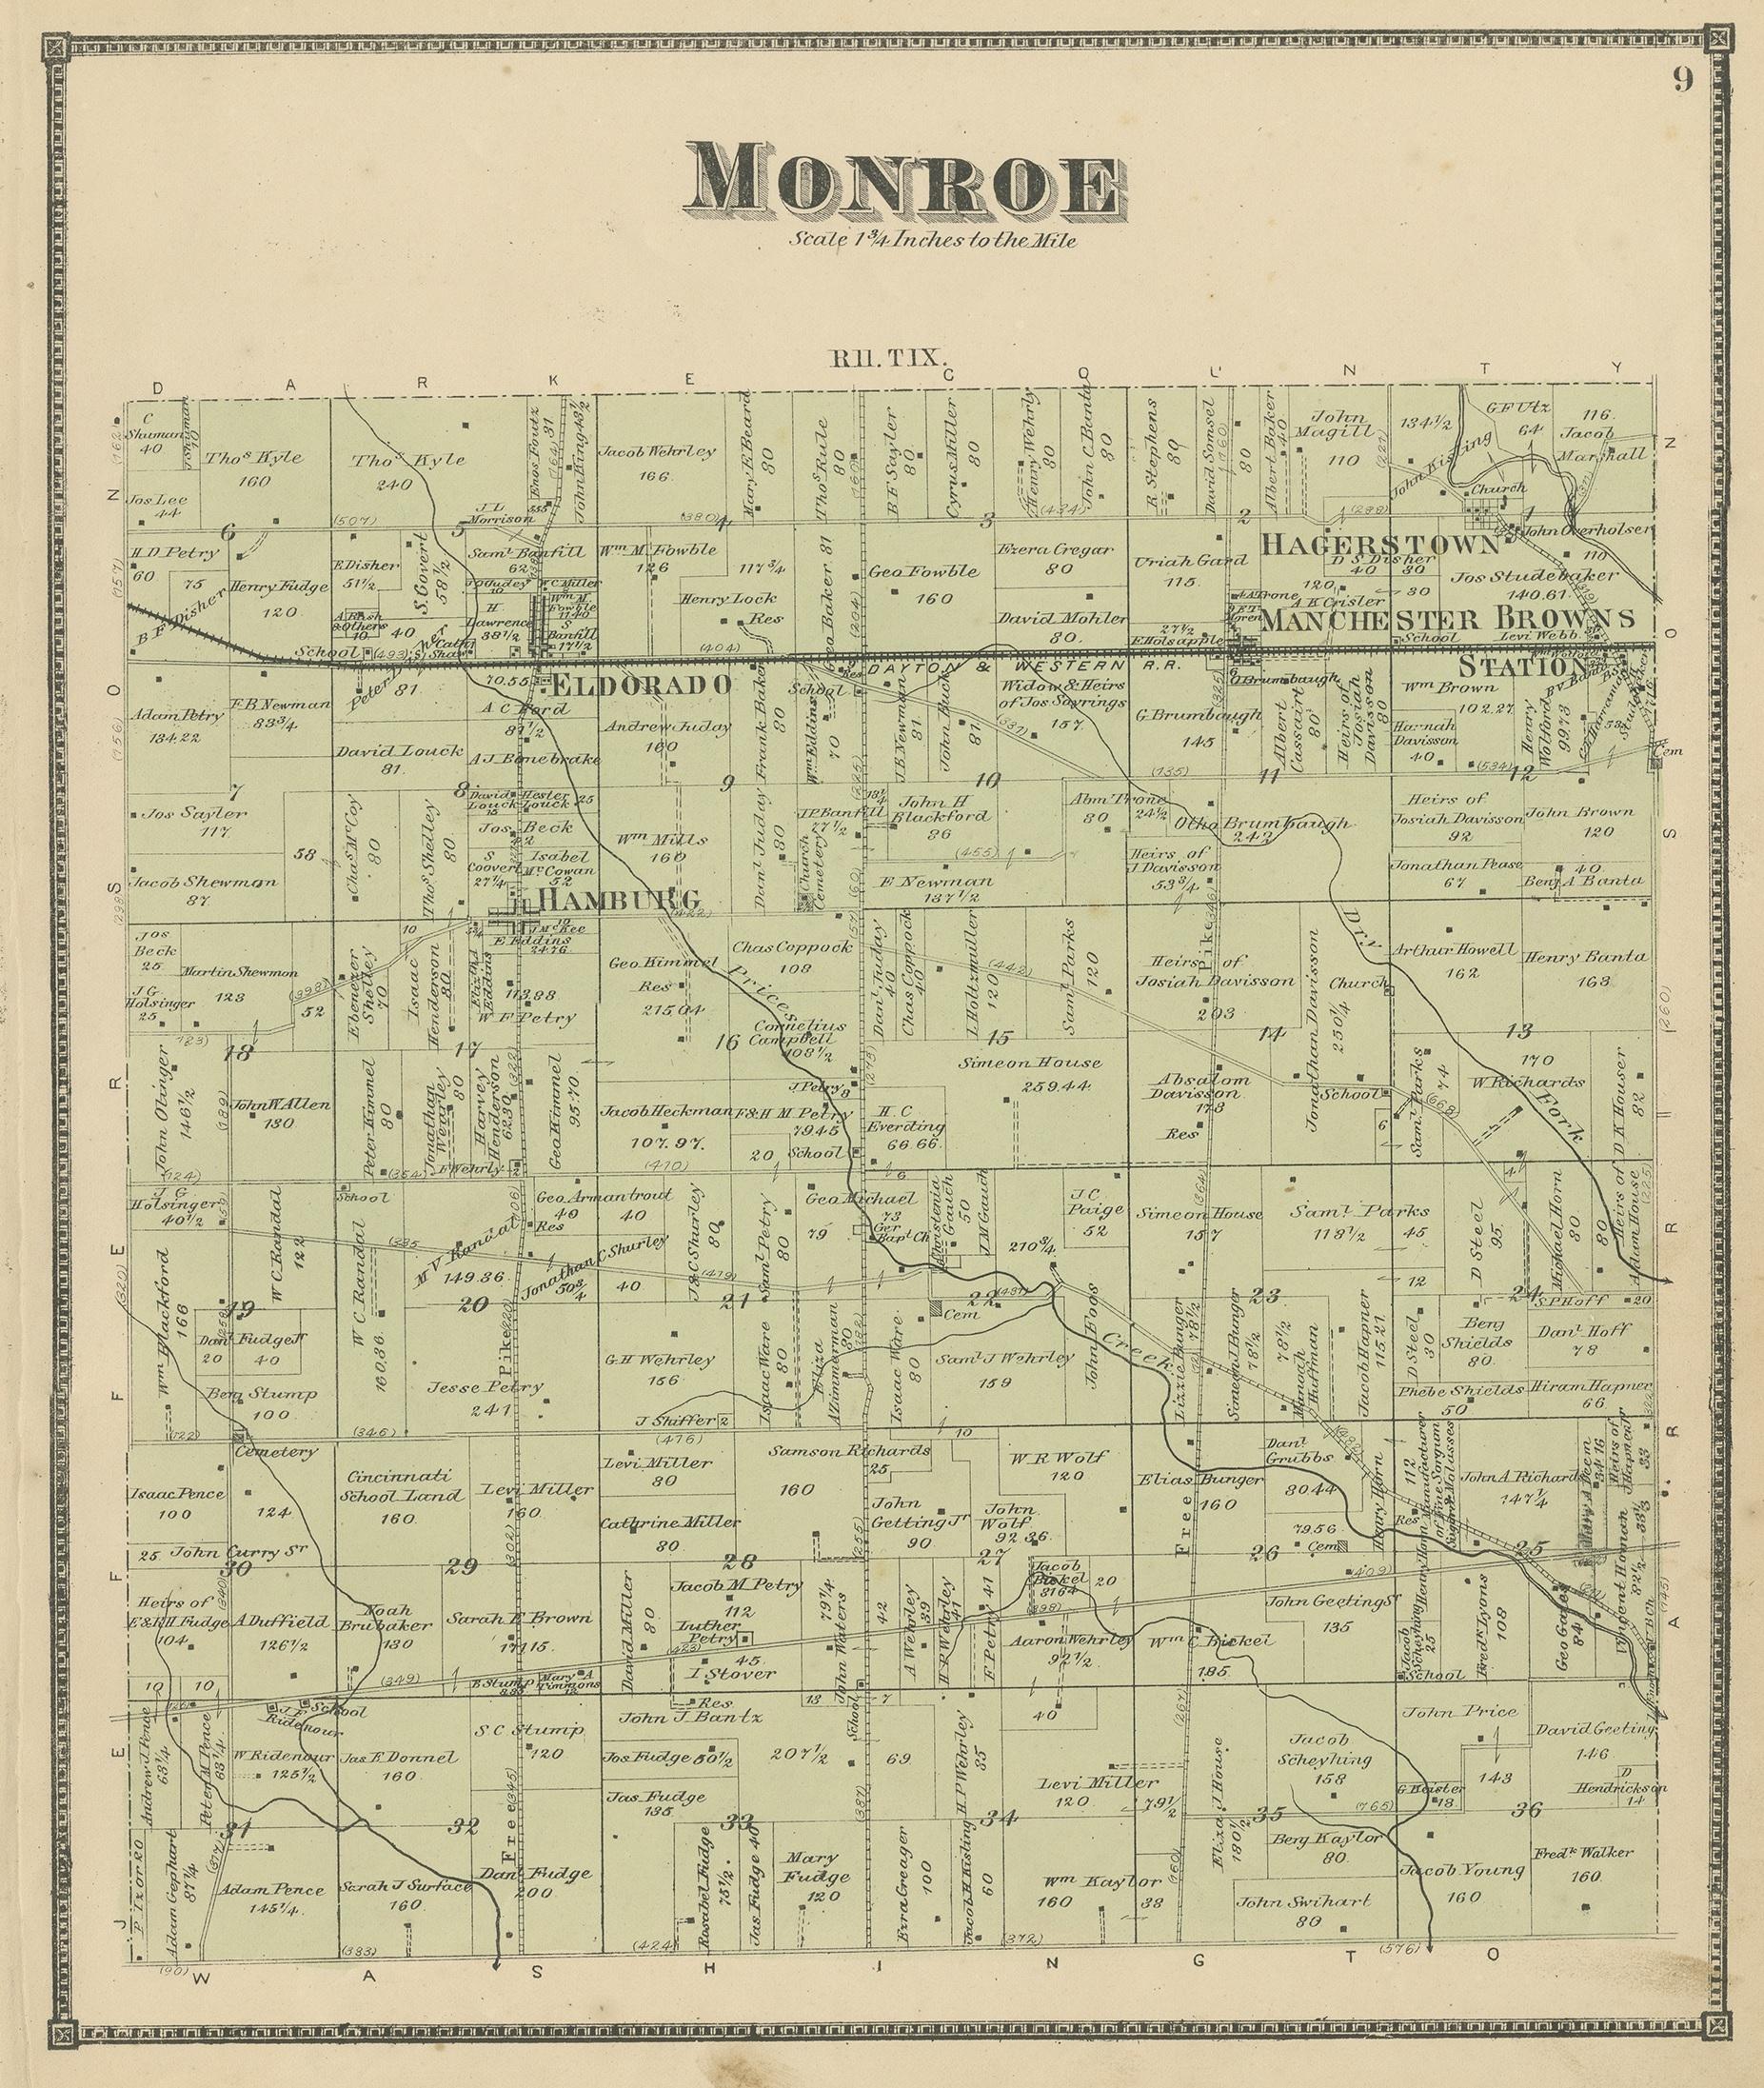 Antique map titled 'Monroe'. Original antique map of Monroe, Ohio. This map originates from 'Atlas of Preble County Ohio' by C.O. Titus. Published 1871.